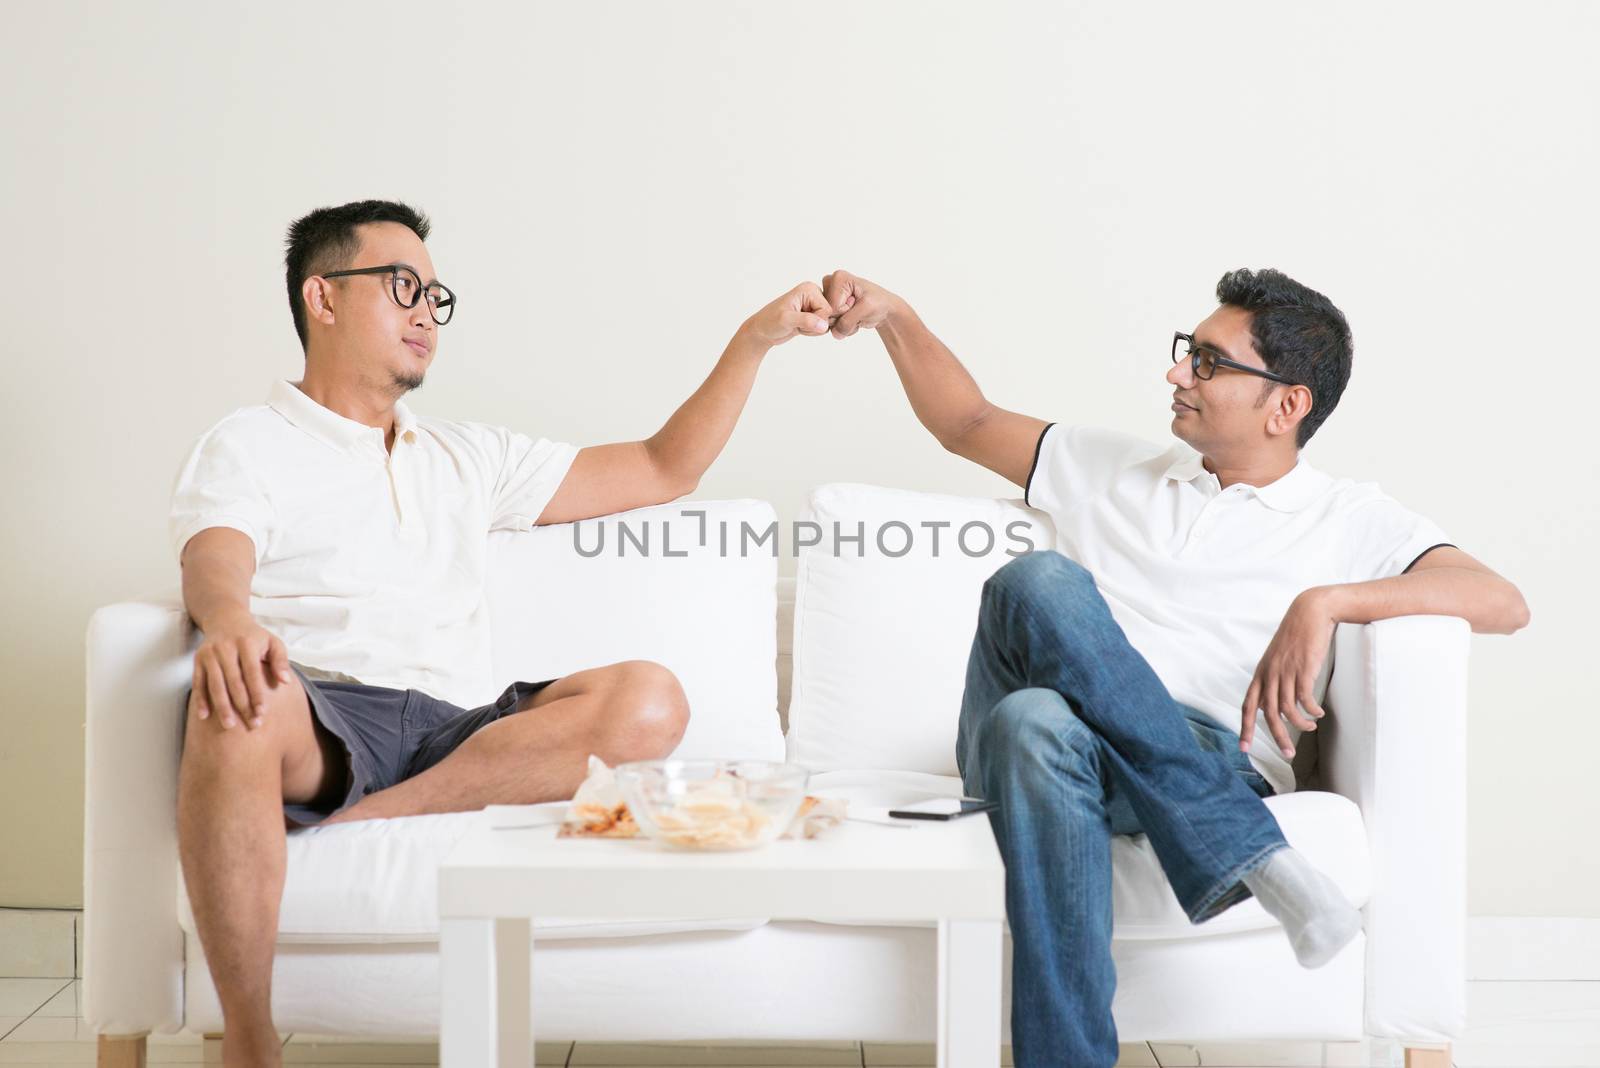 Man sitting on sofa and giving fist bump to friend at home. Multiracial people friendship.